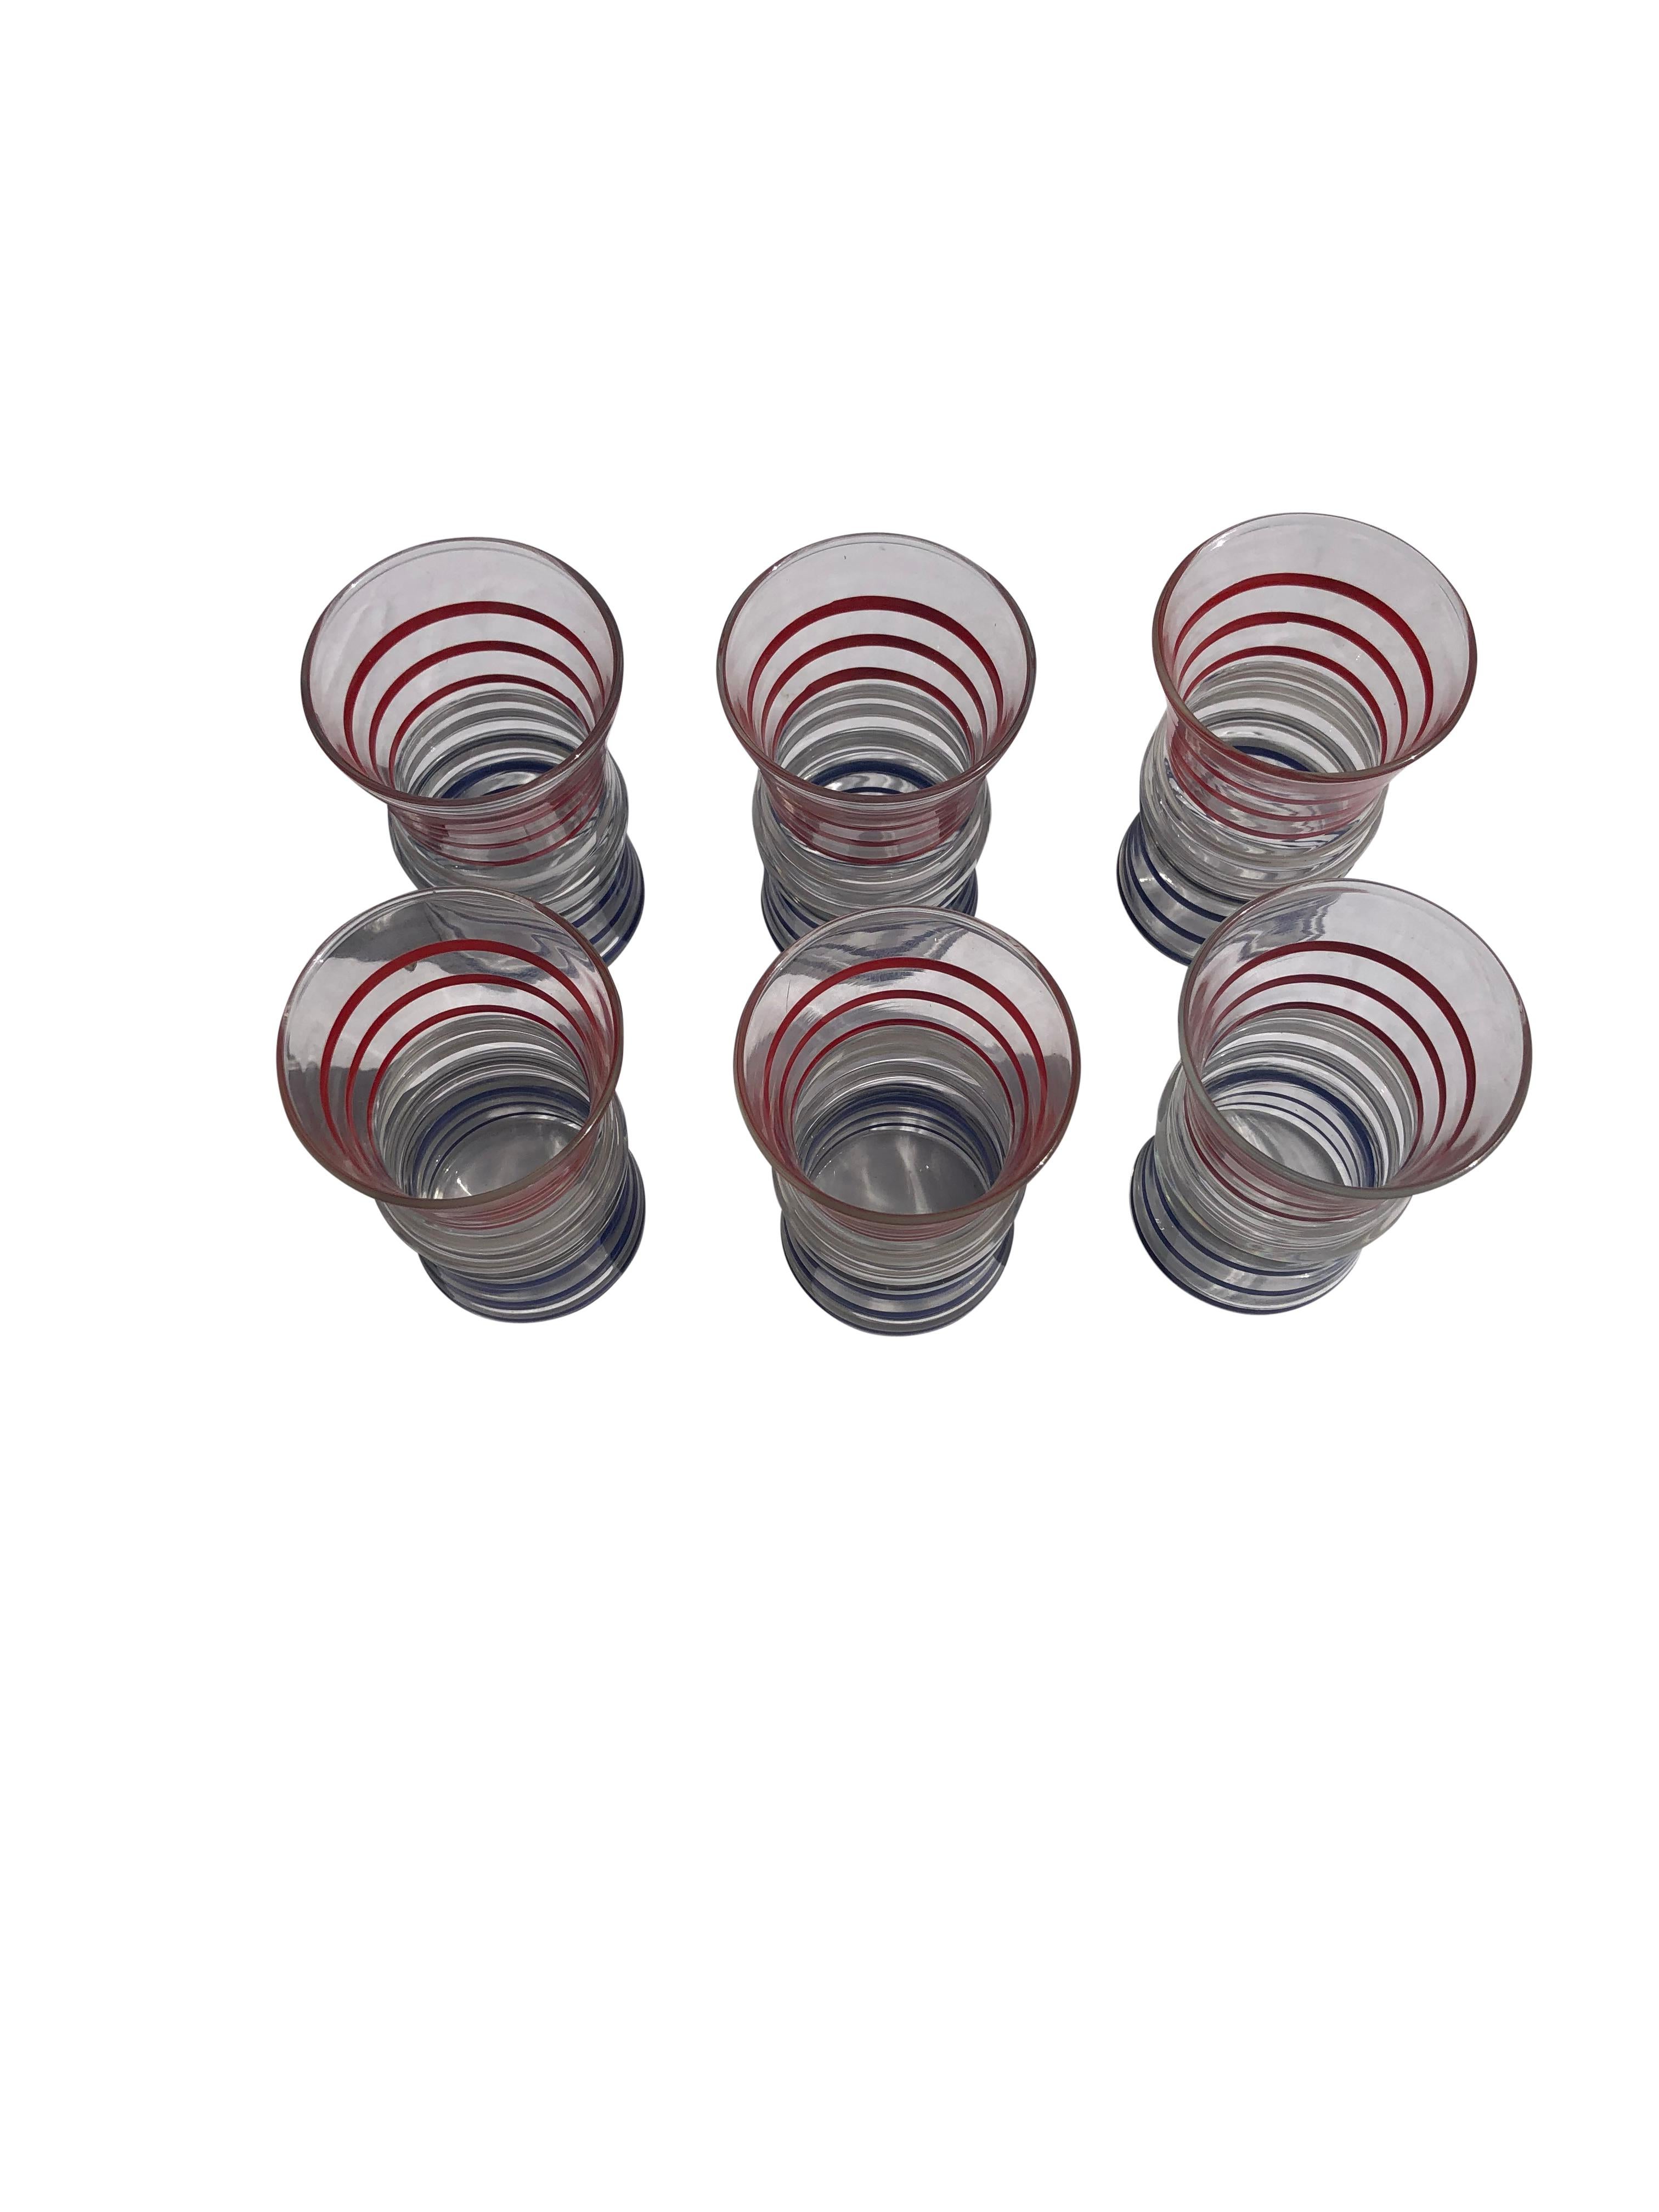 American Vintage 4 oz Tumblers with Red, White, and Blue Bands - Set of 6 For Sale